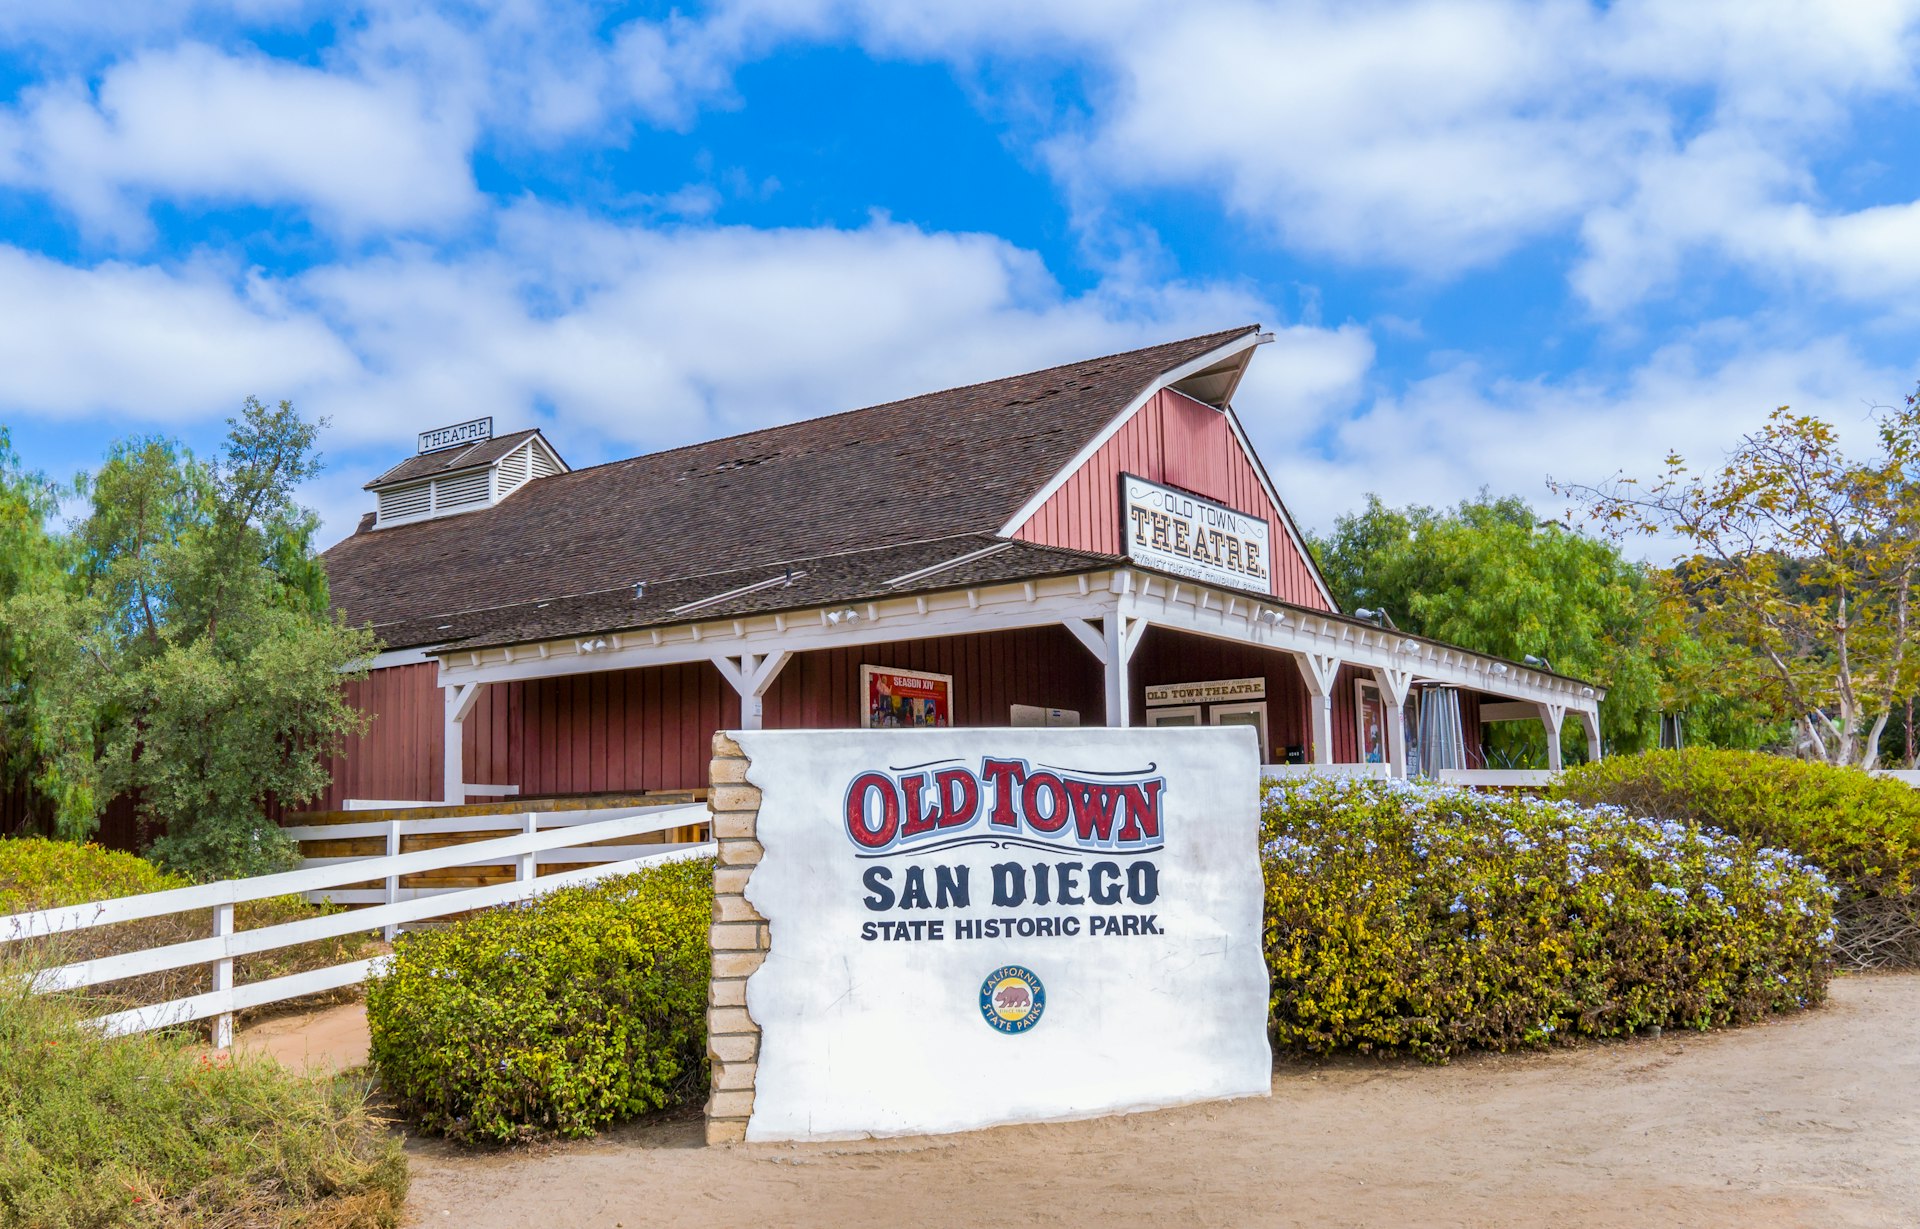 A sign reading "Old Town San Diego State Historic Park" stands in front of an old-fashioned wooden building with a pointed roof